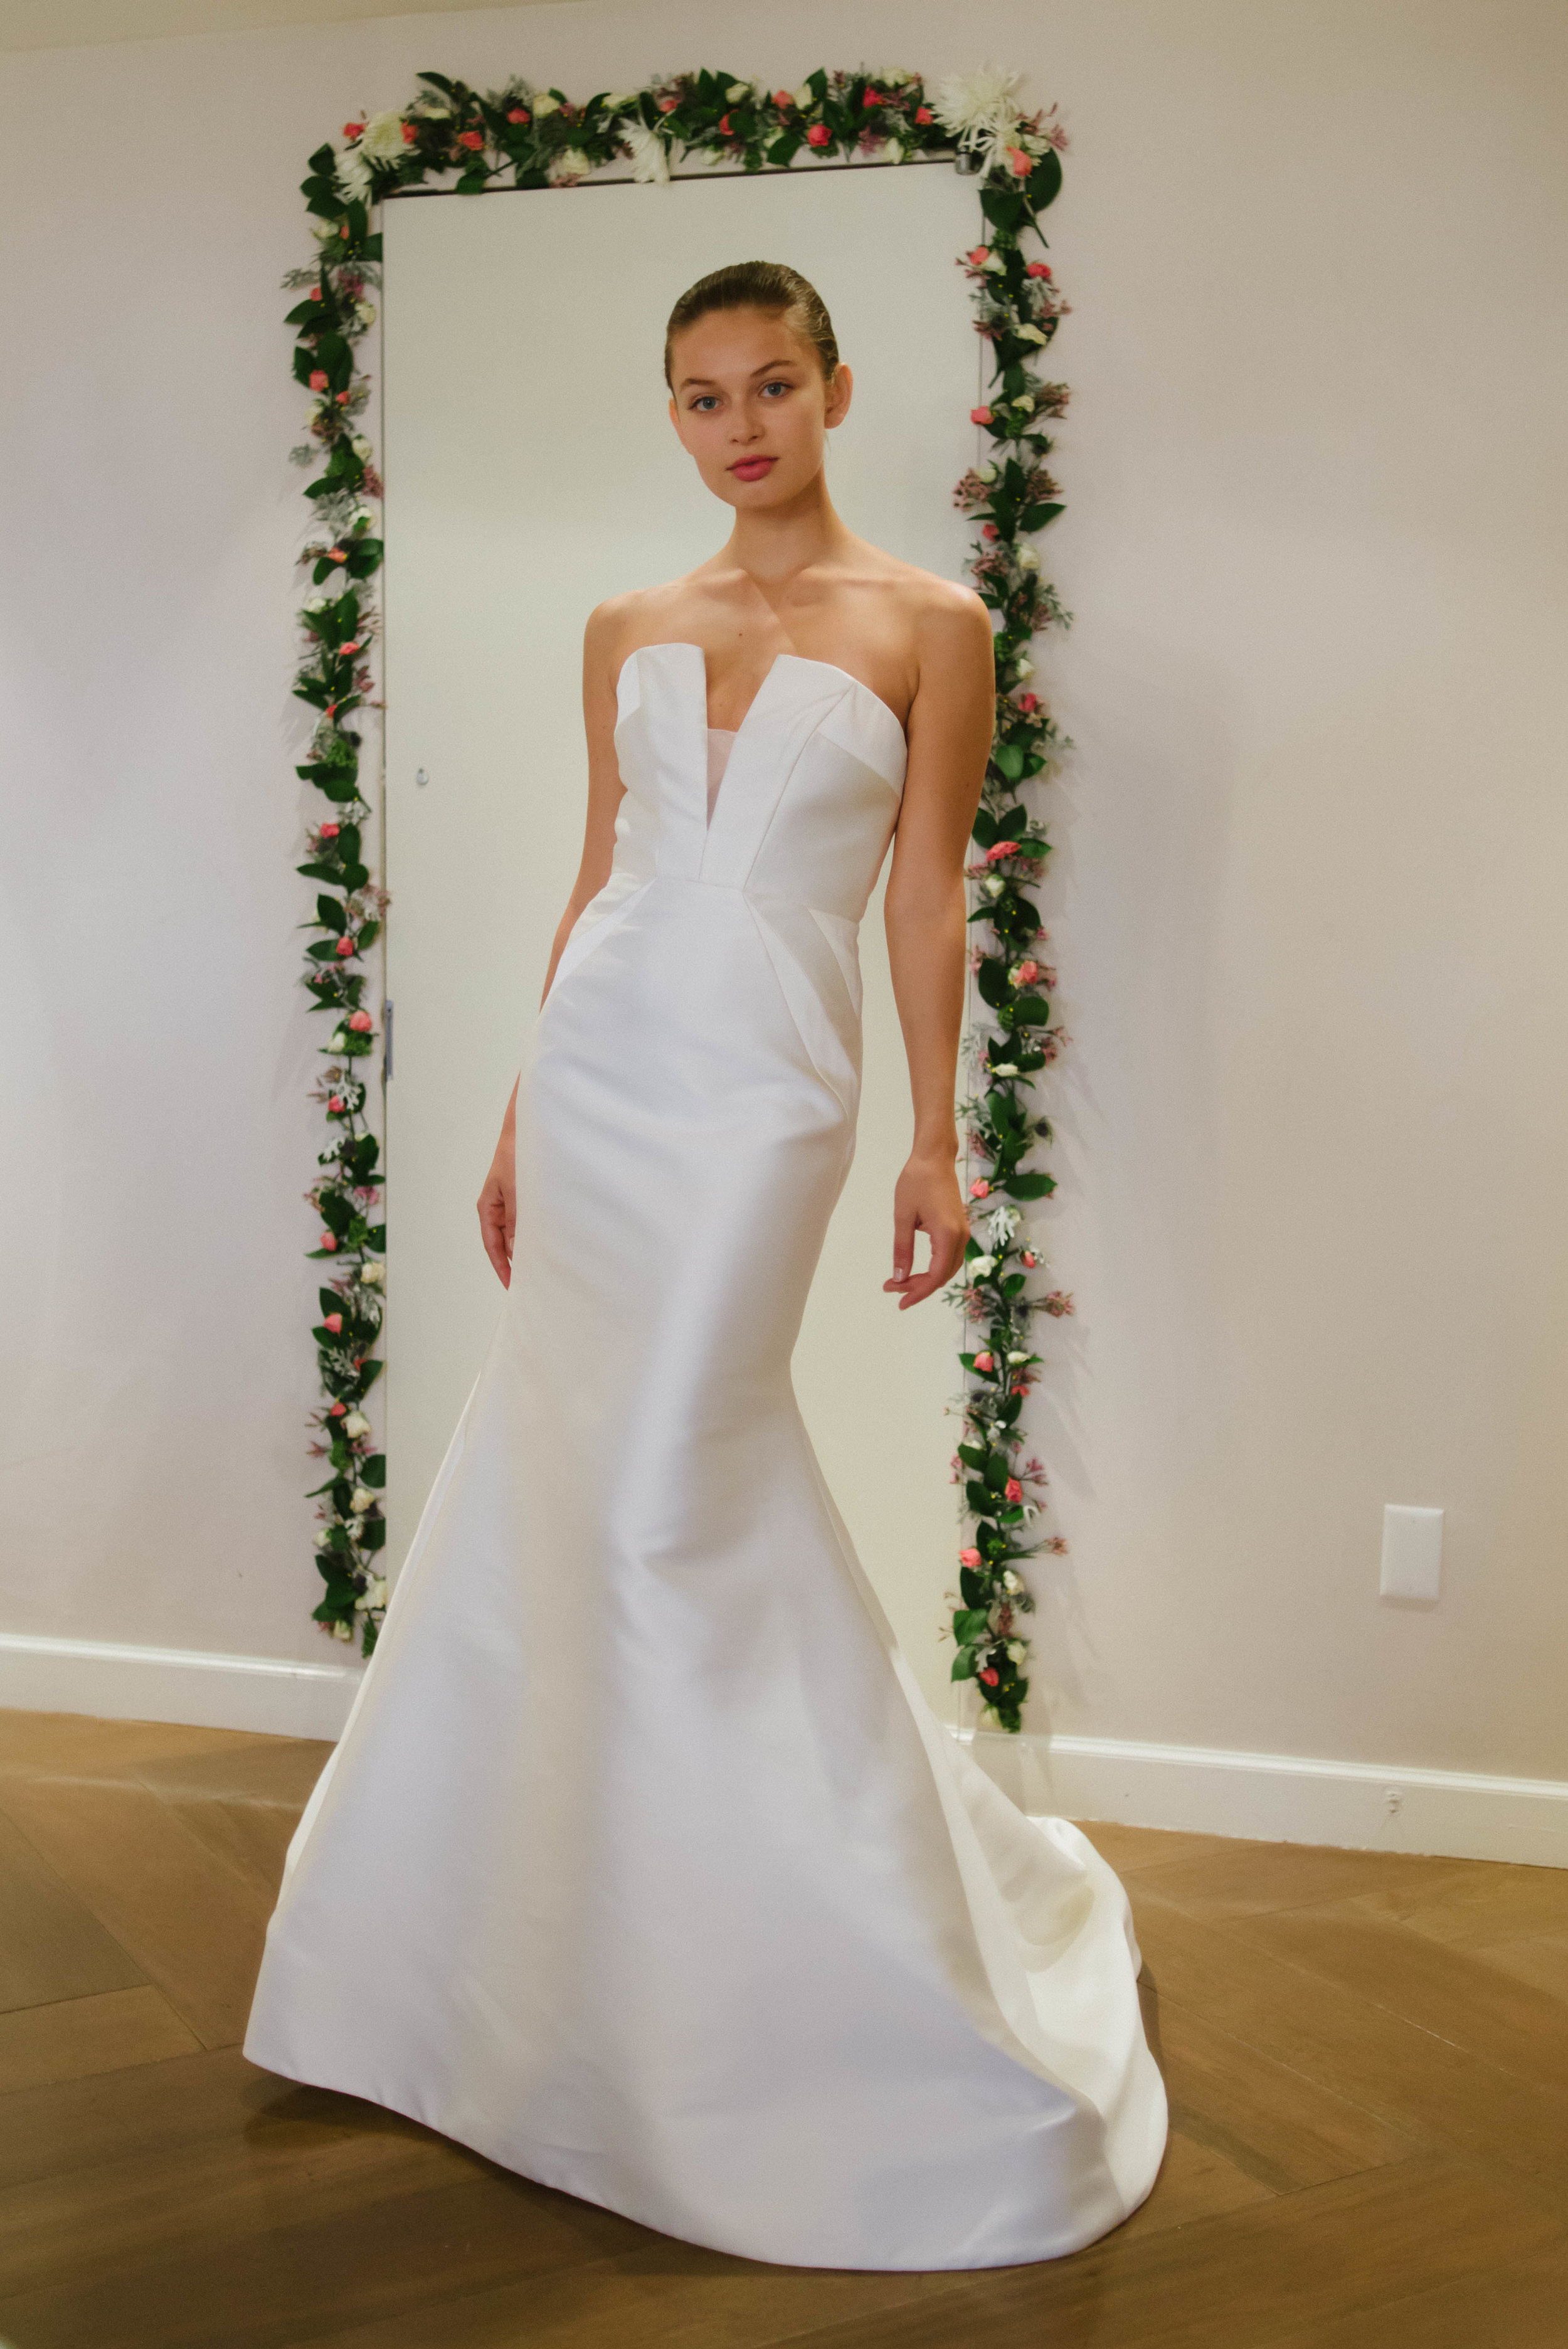 Aggregate 76+ 2017 gown trends super hot